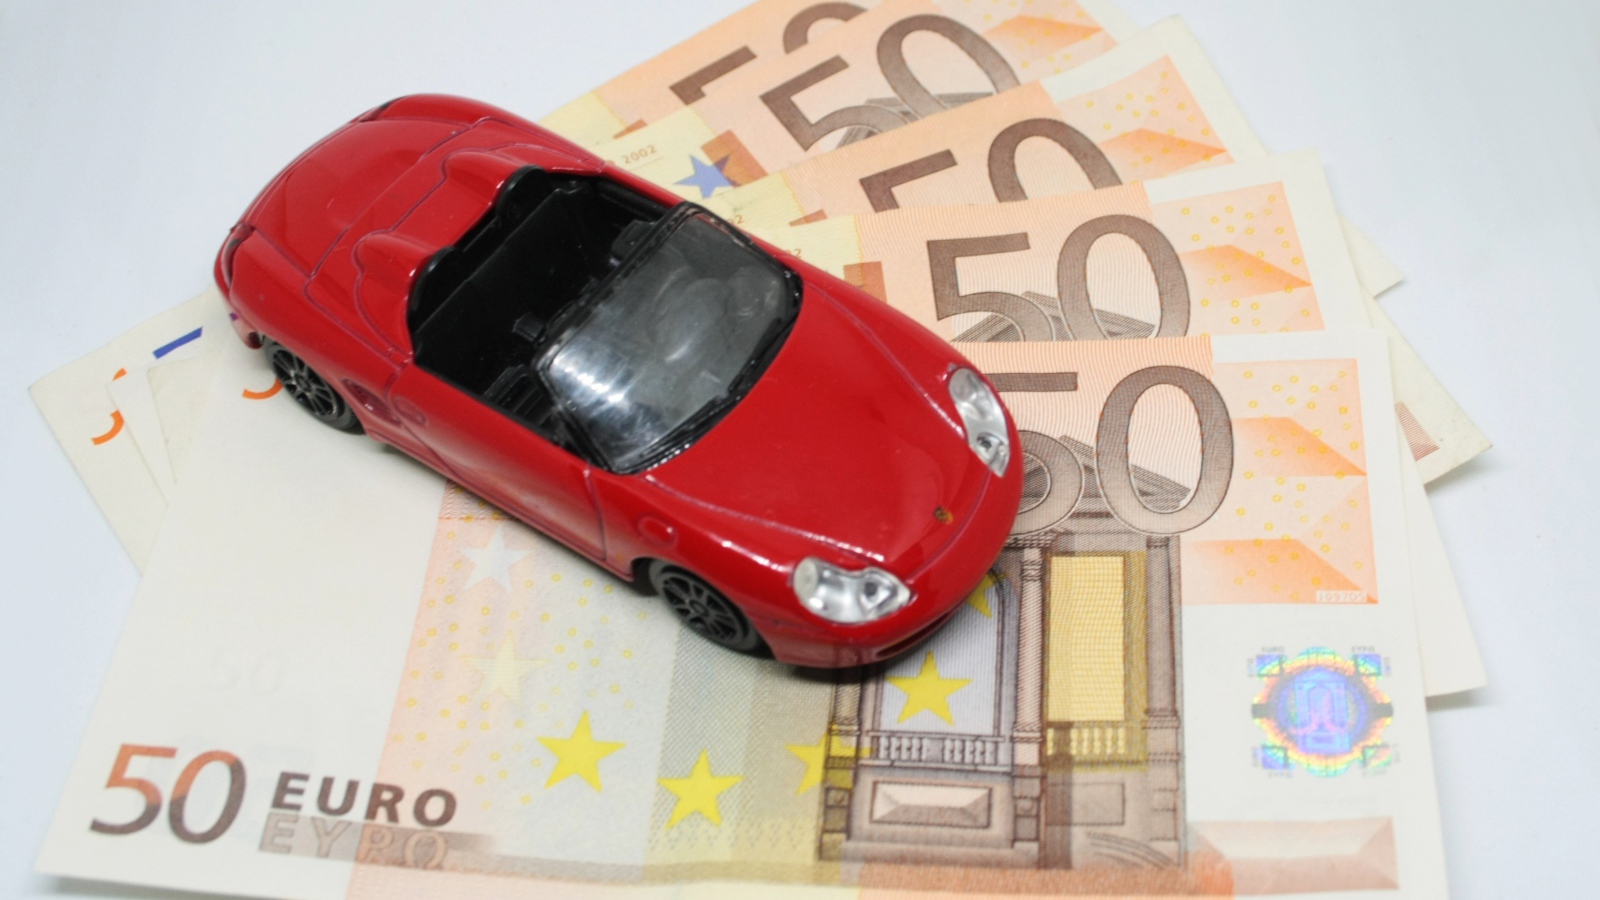 Red toy car with euro bills